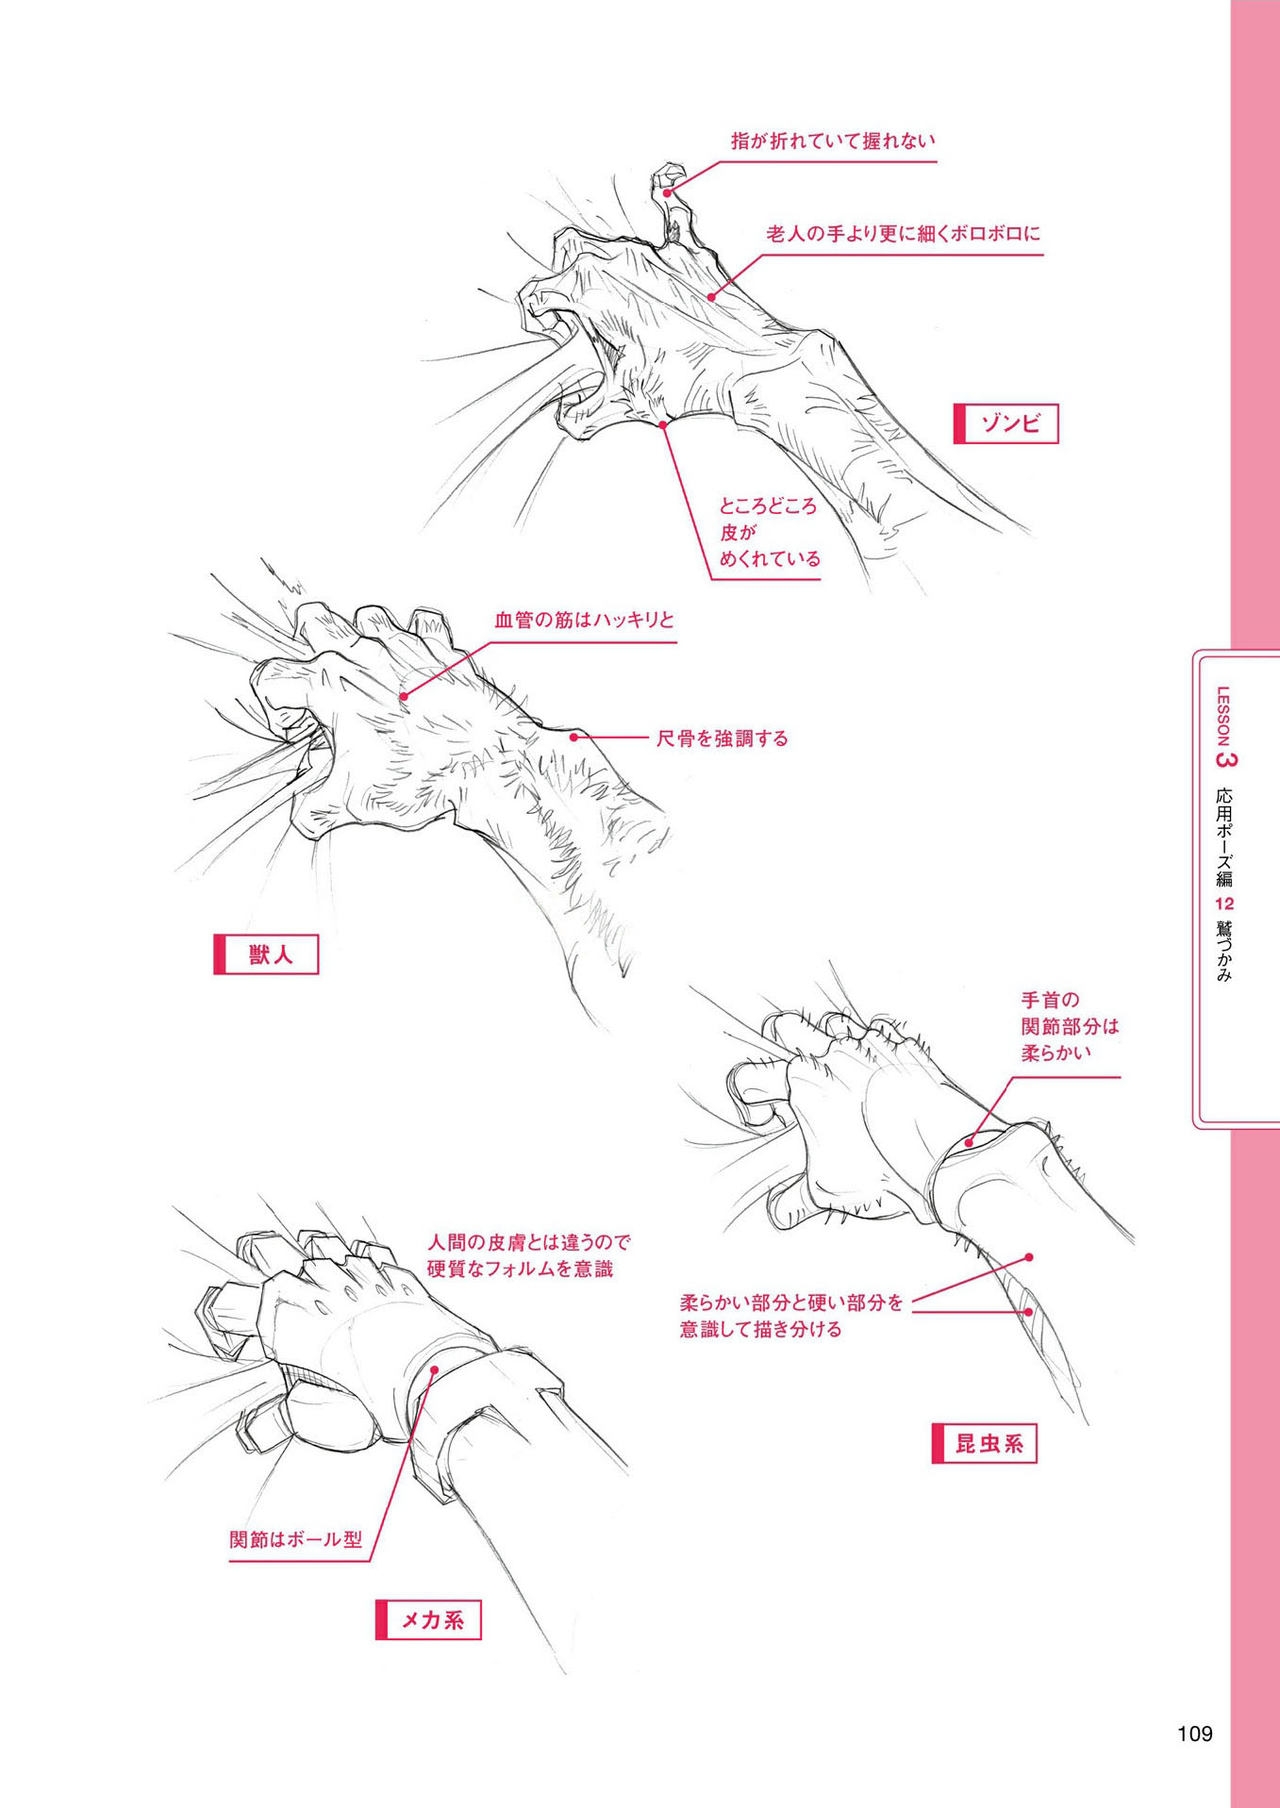 How to draw hands 109